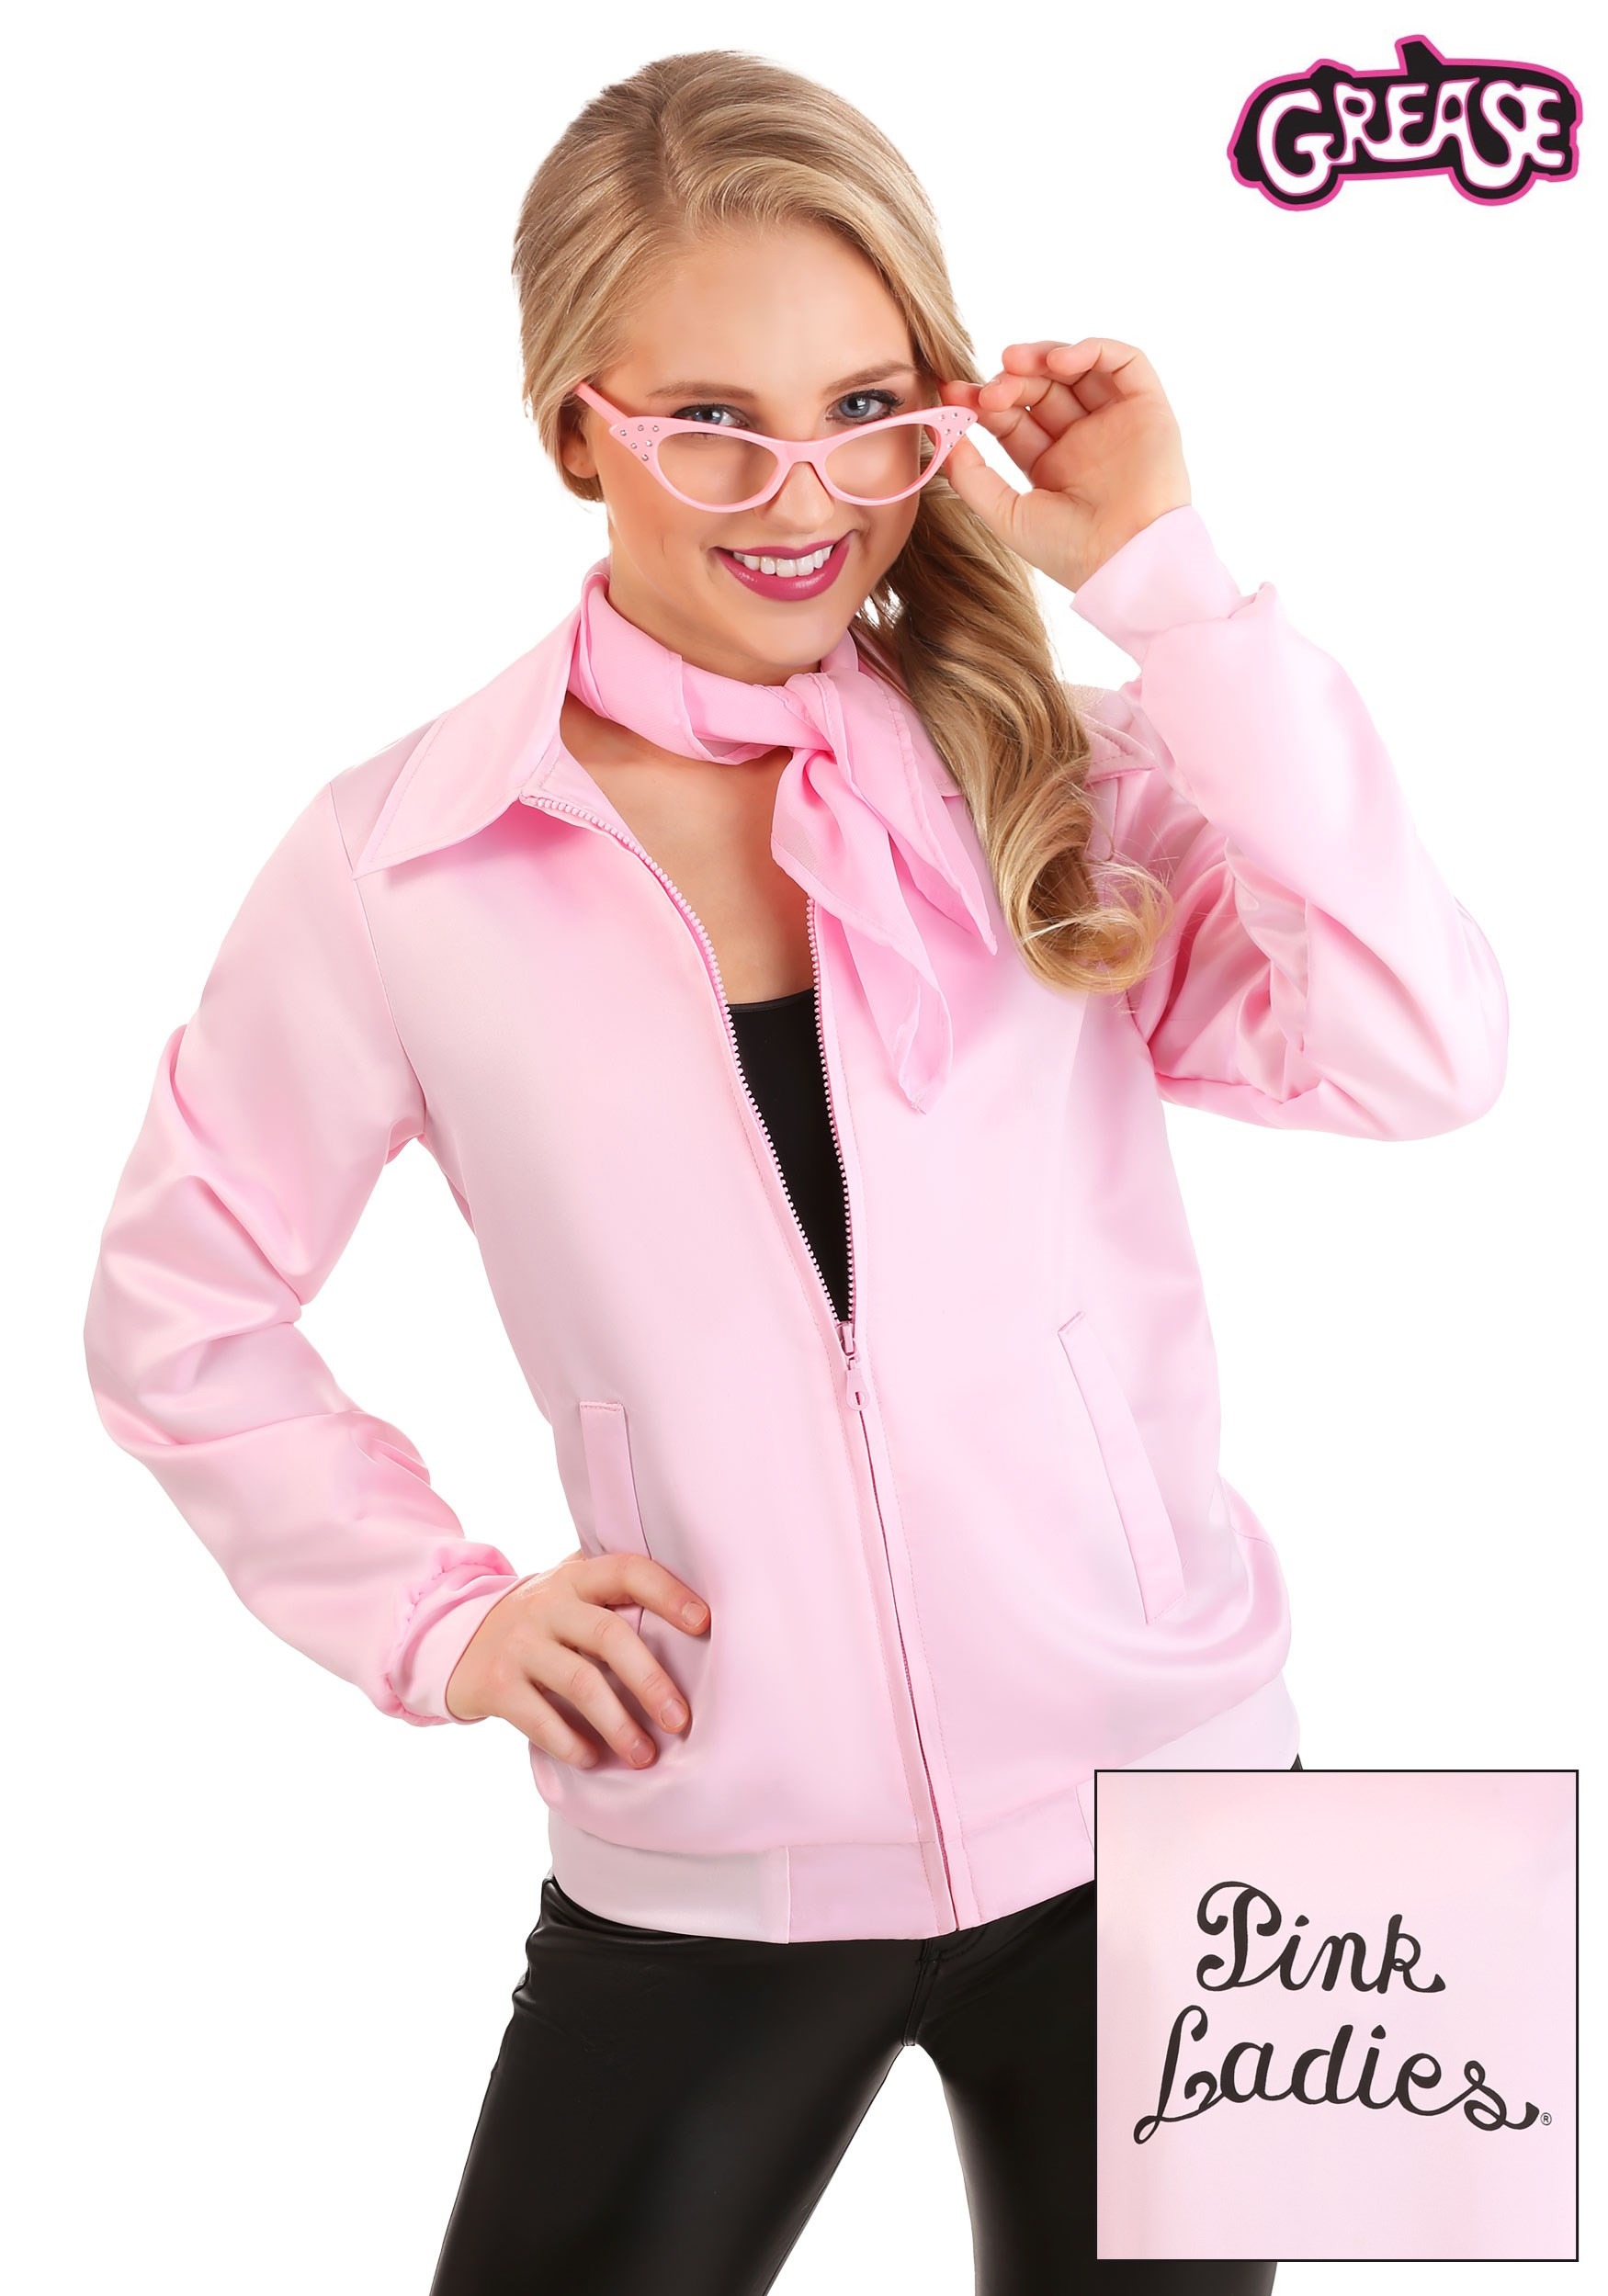 Grease Pink Ladies Costume Jacket for Women